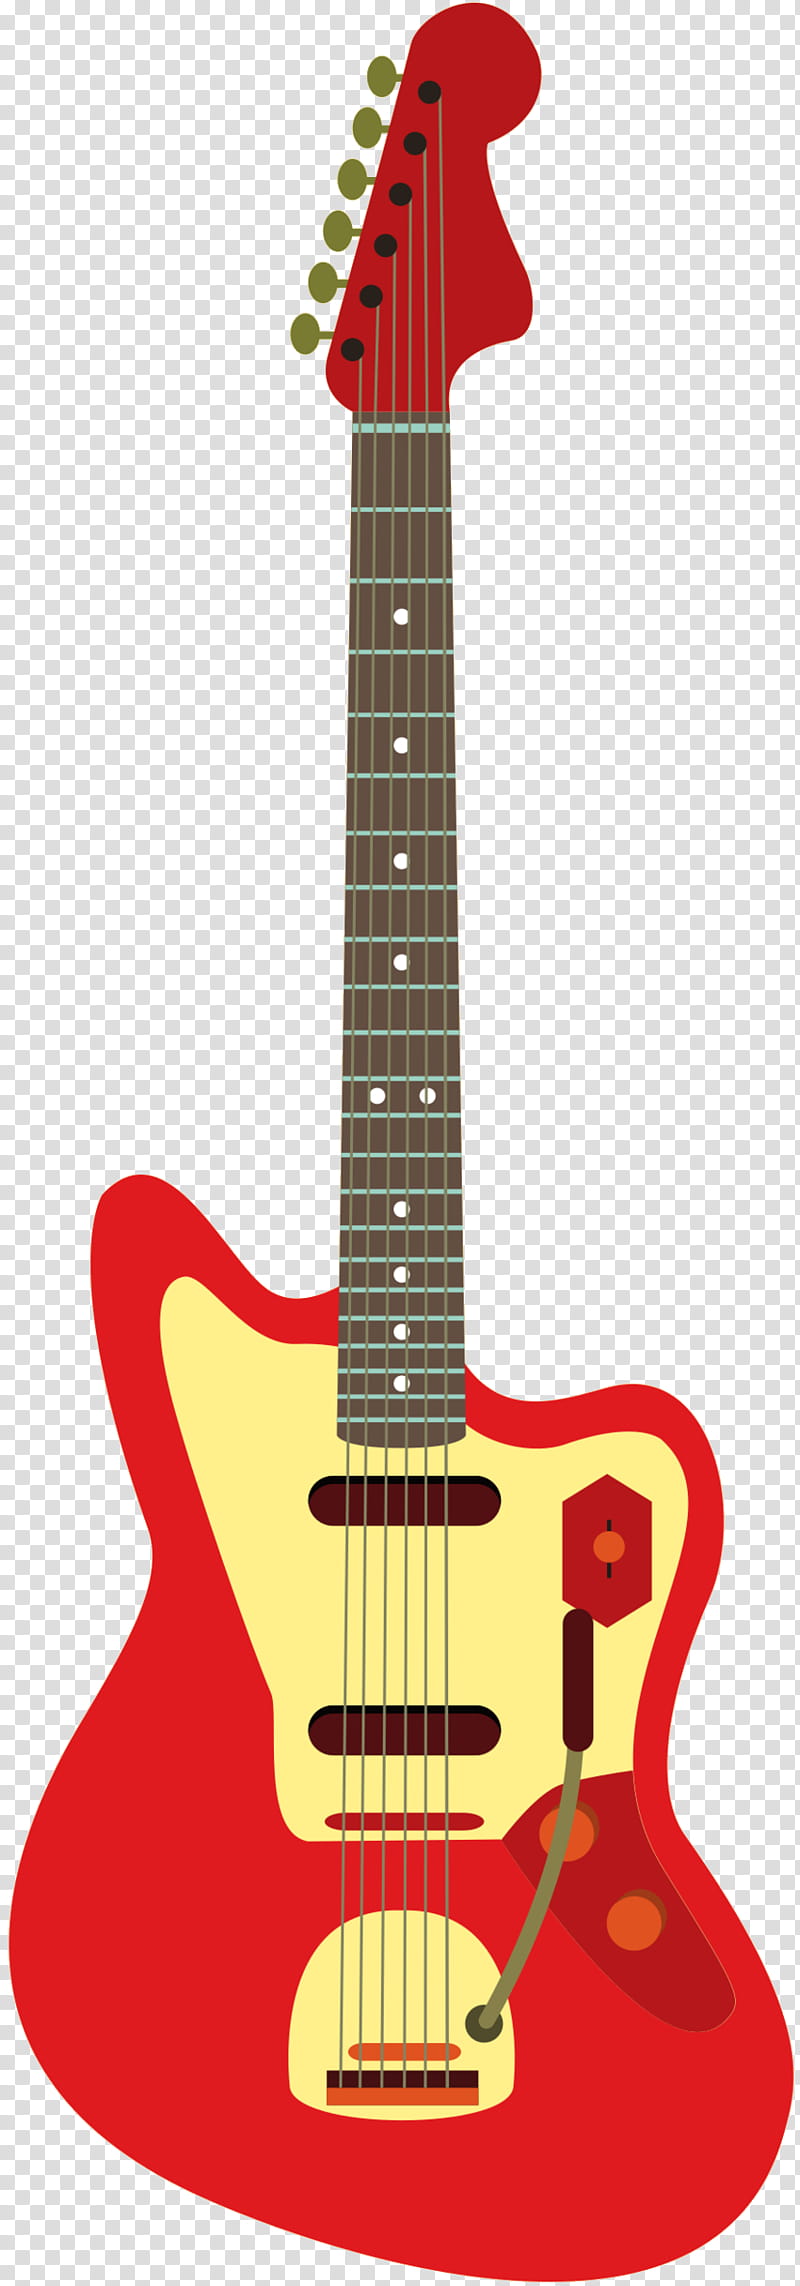 Guitar, Electric Guitar, Fender Squier Affinity Telecaster Electric Guitar, Fender Telecaster, Fender Jazzmaster, Fender Stratocaster, Acoustic Guitar, Music transparent background PNG clipart